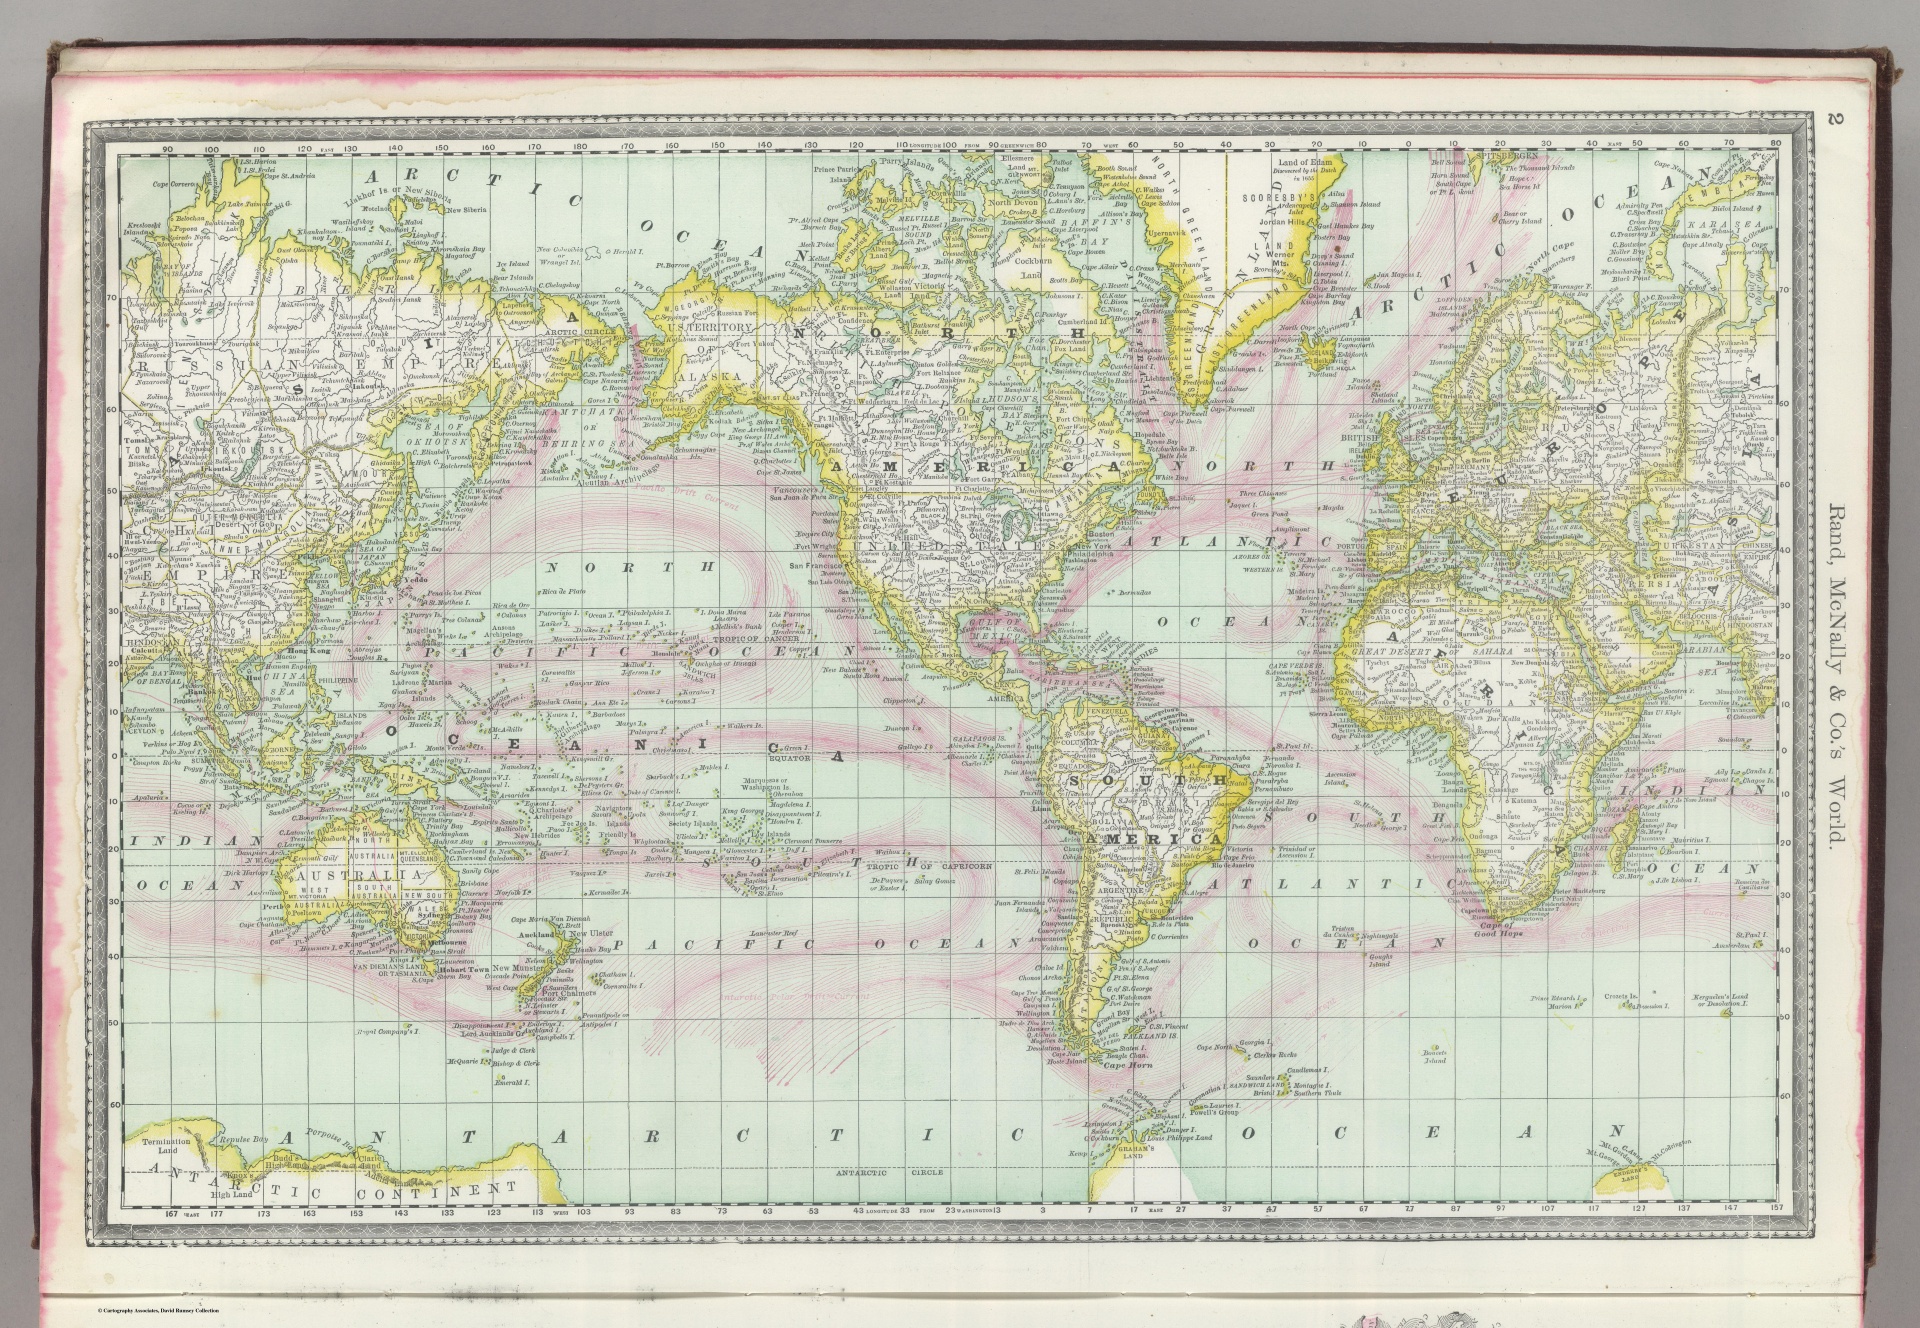 Land and countries outlined in yellow. Ocean currents in red. Meridians Washington and Greenwich. Relief shown by hachures. 1889